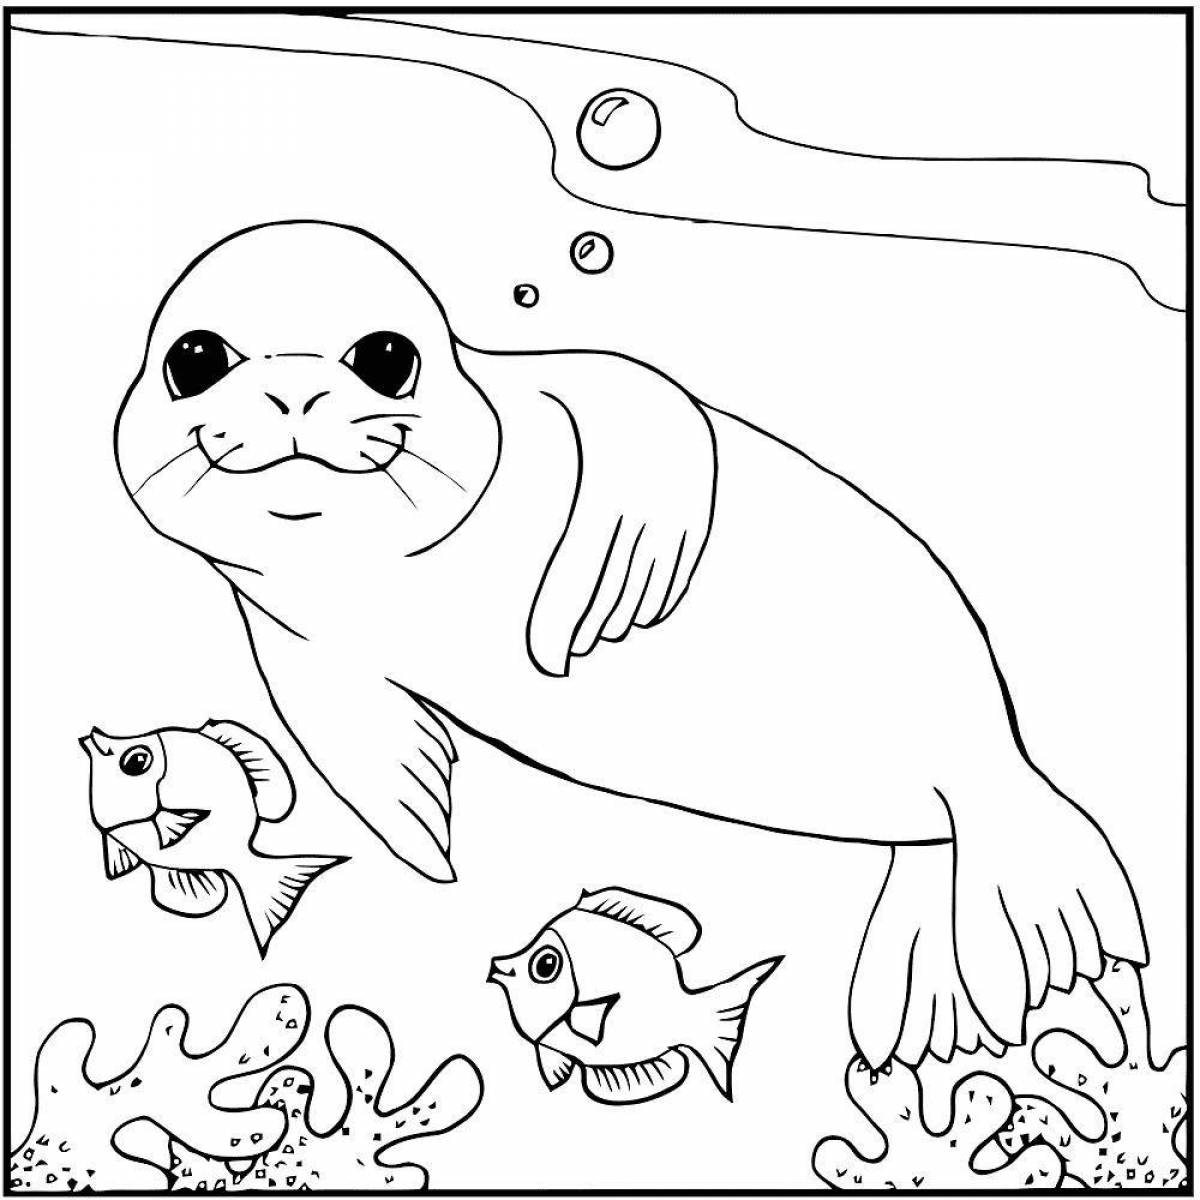 Great Baikal seal coloring book for kids